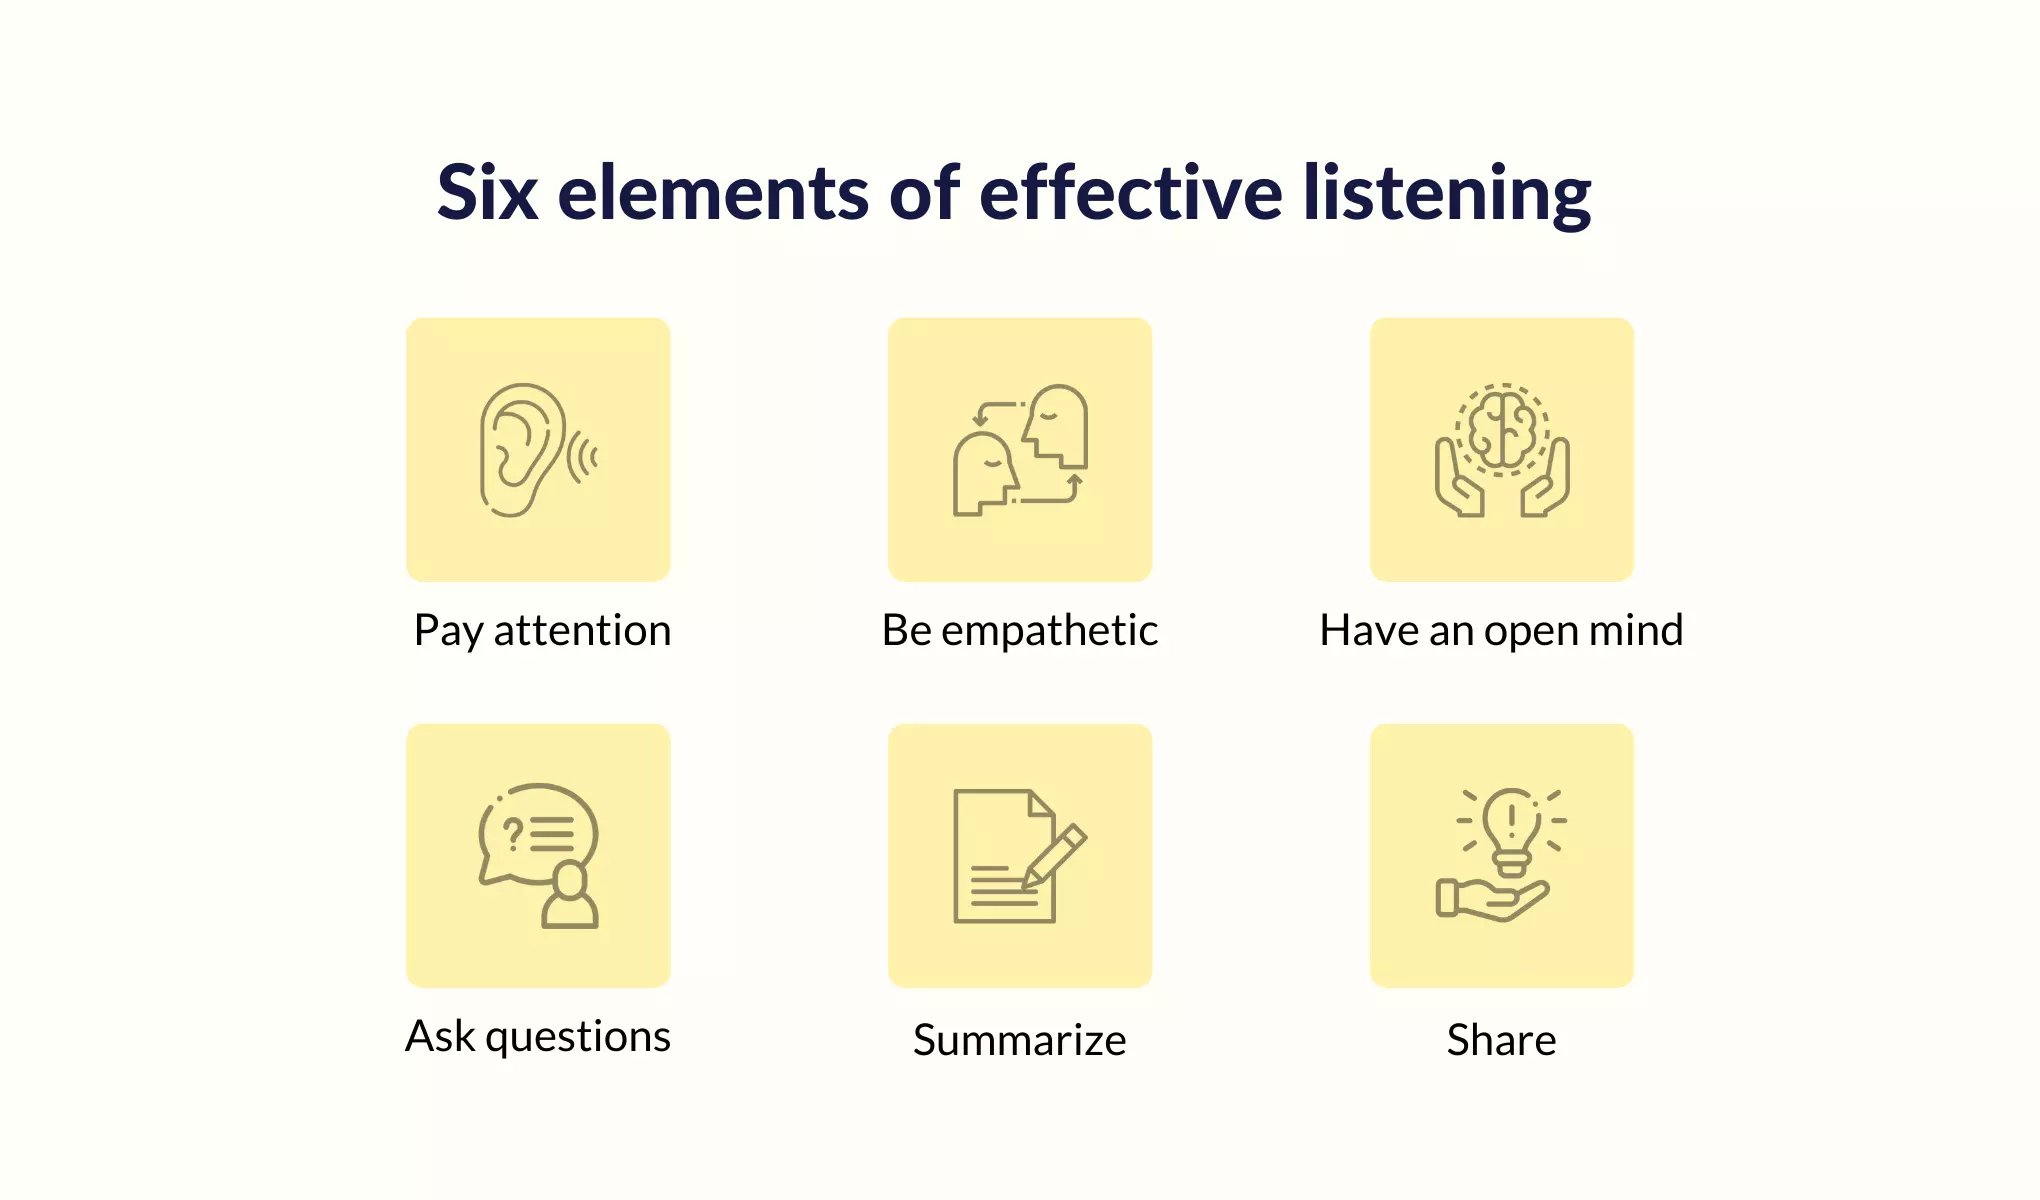 Elements of effective listening to improve empathy in customer service